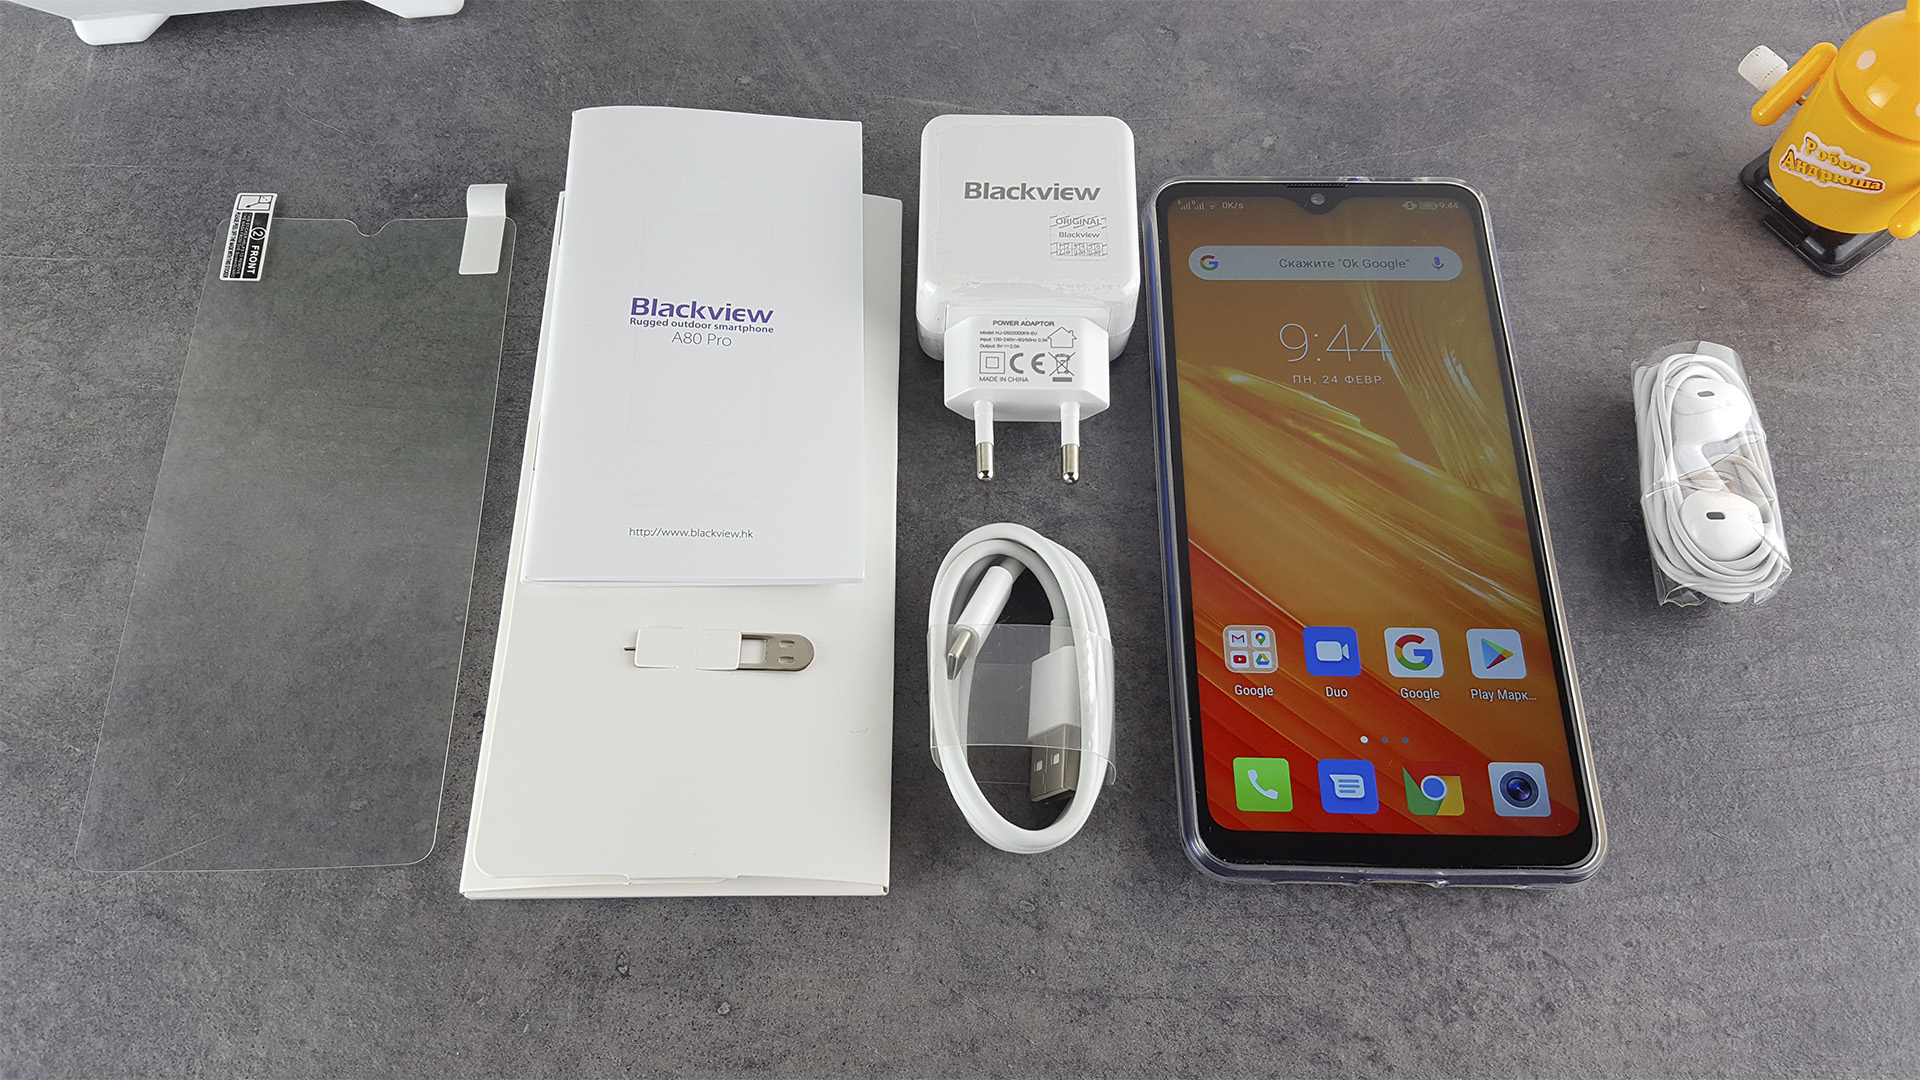 Blackview A80 Pro review - package